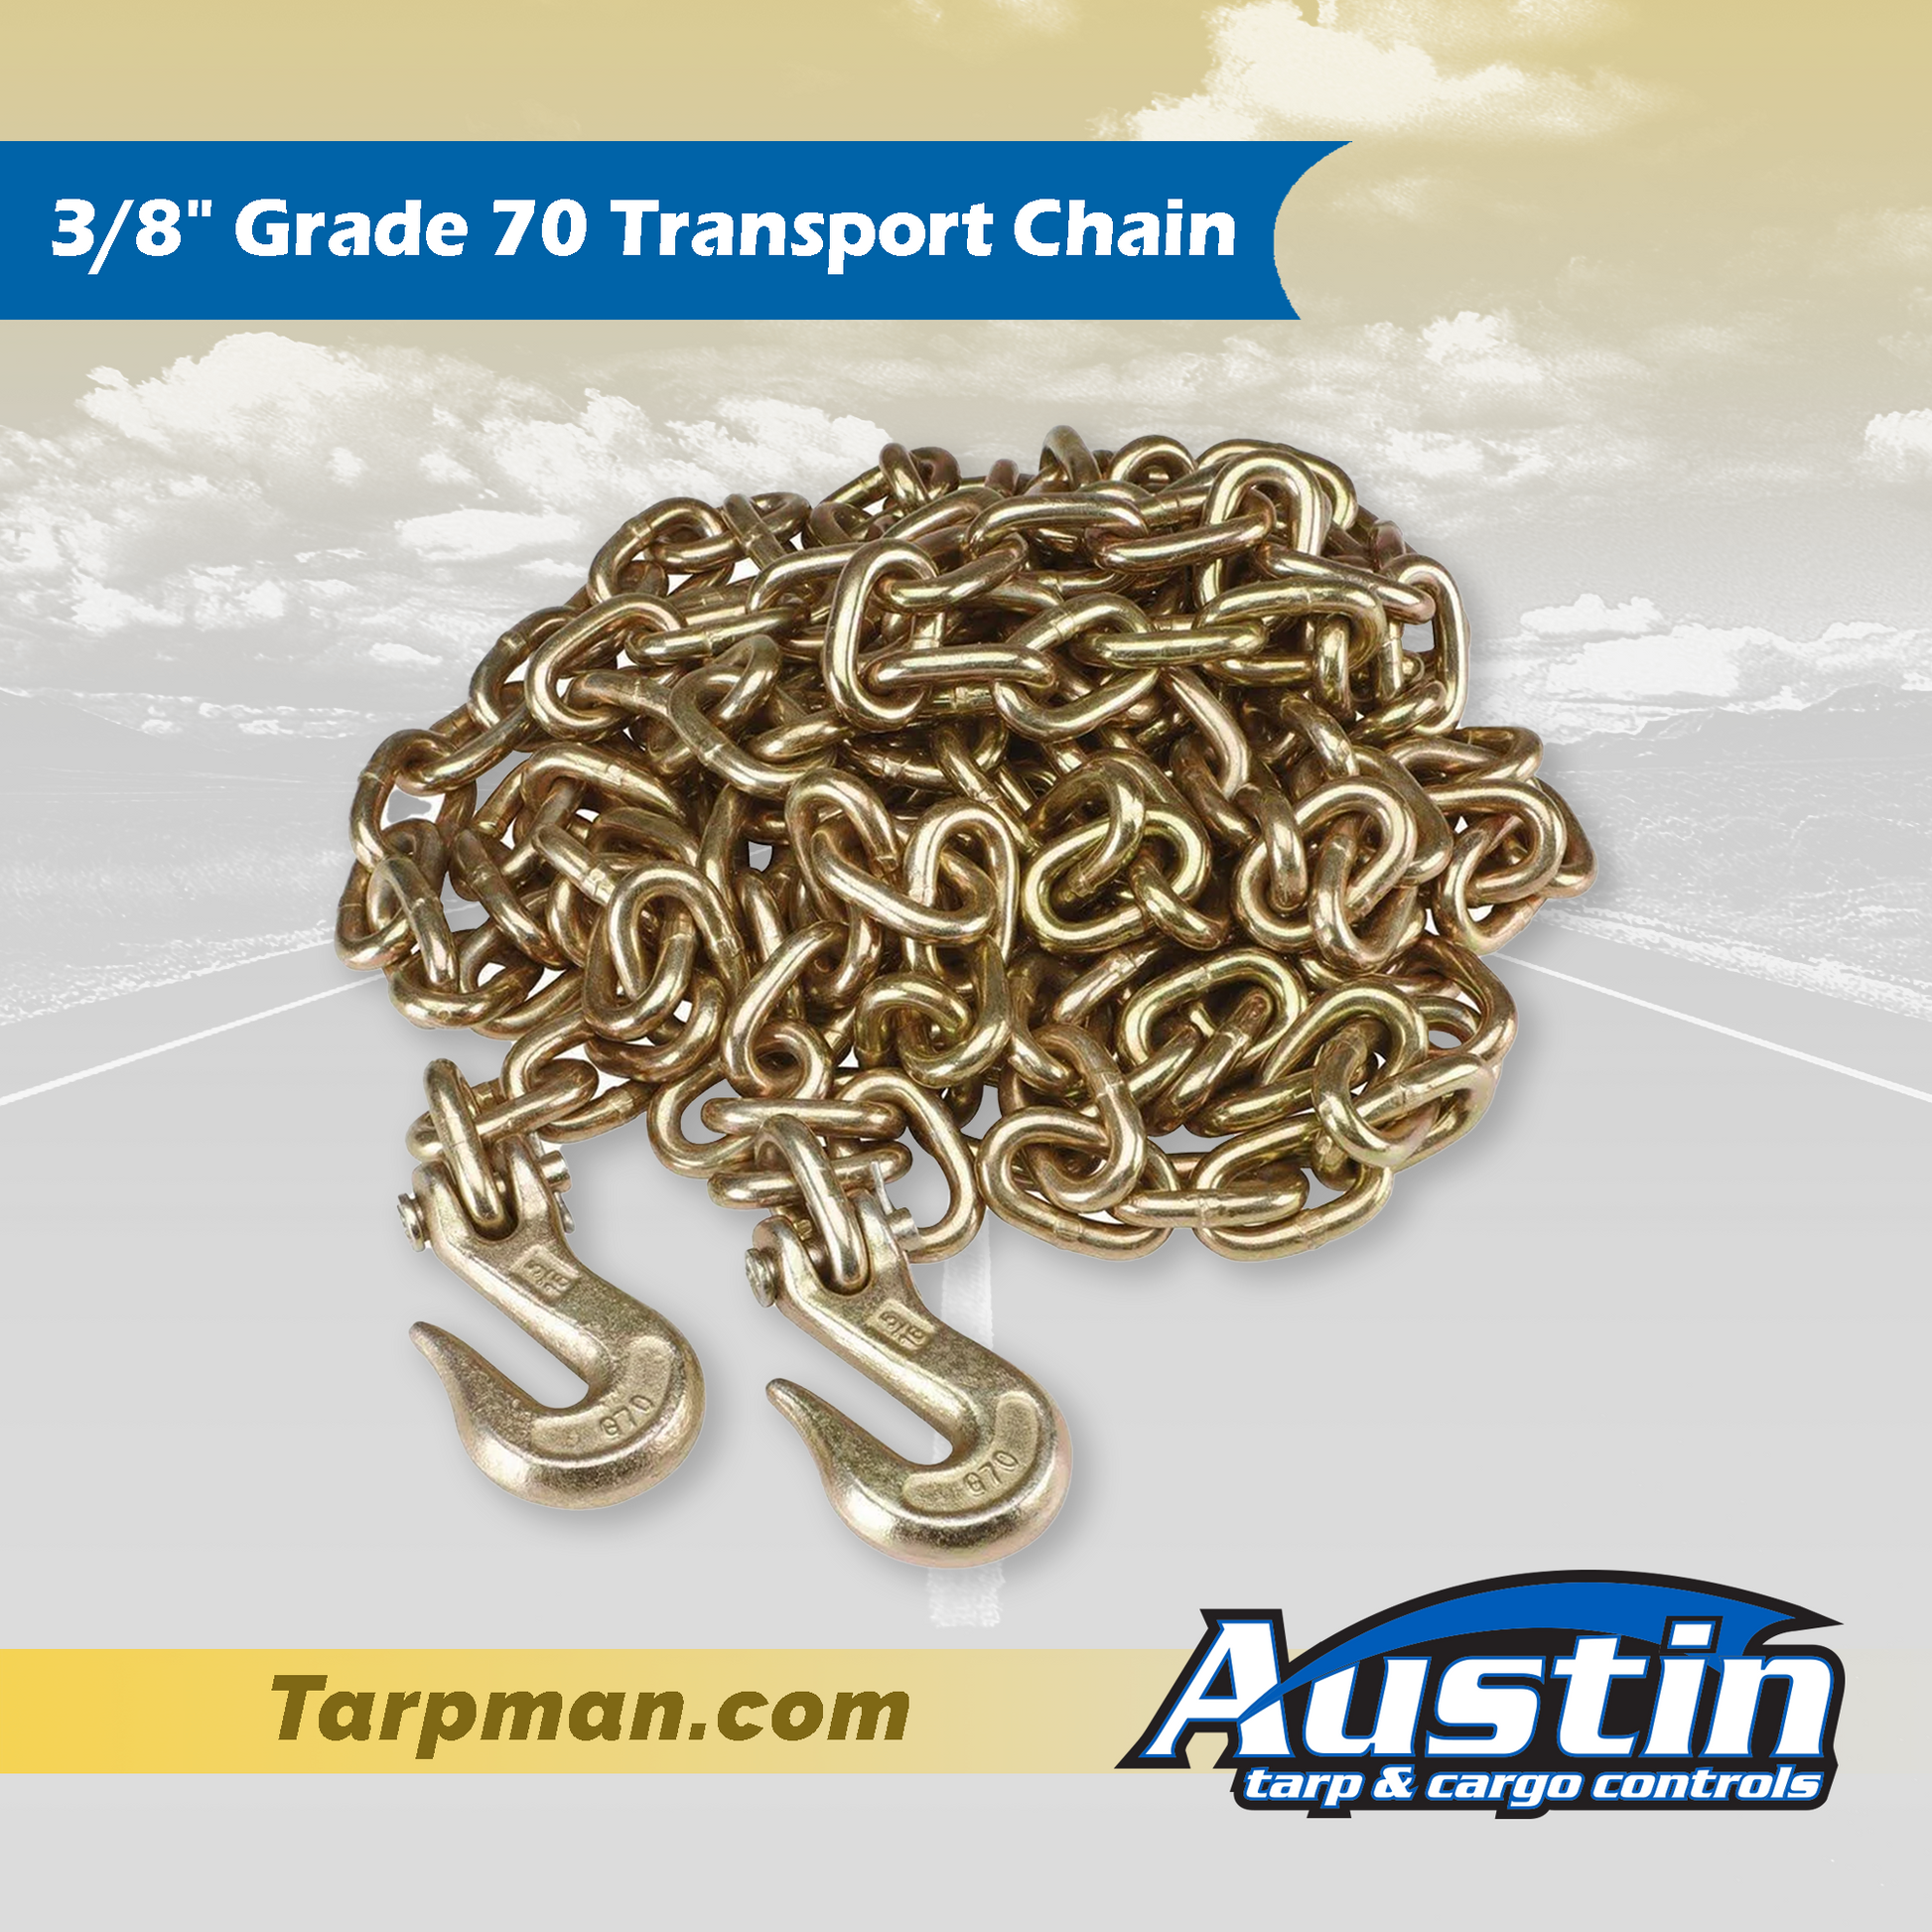 New 3/8 x 25' Grade 70 Transport Chain with Grab Hooks Made in USA!